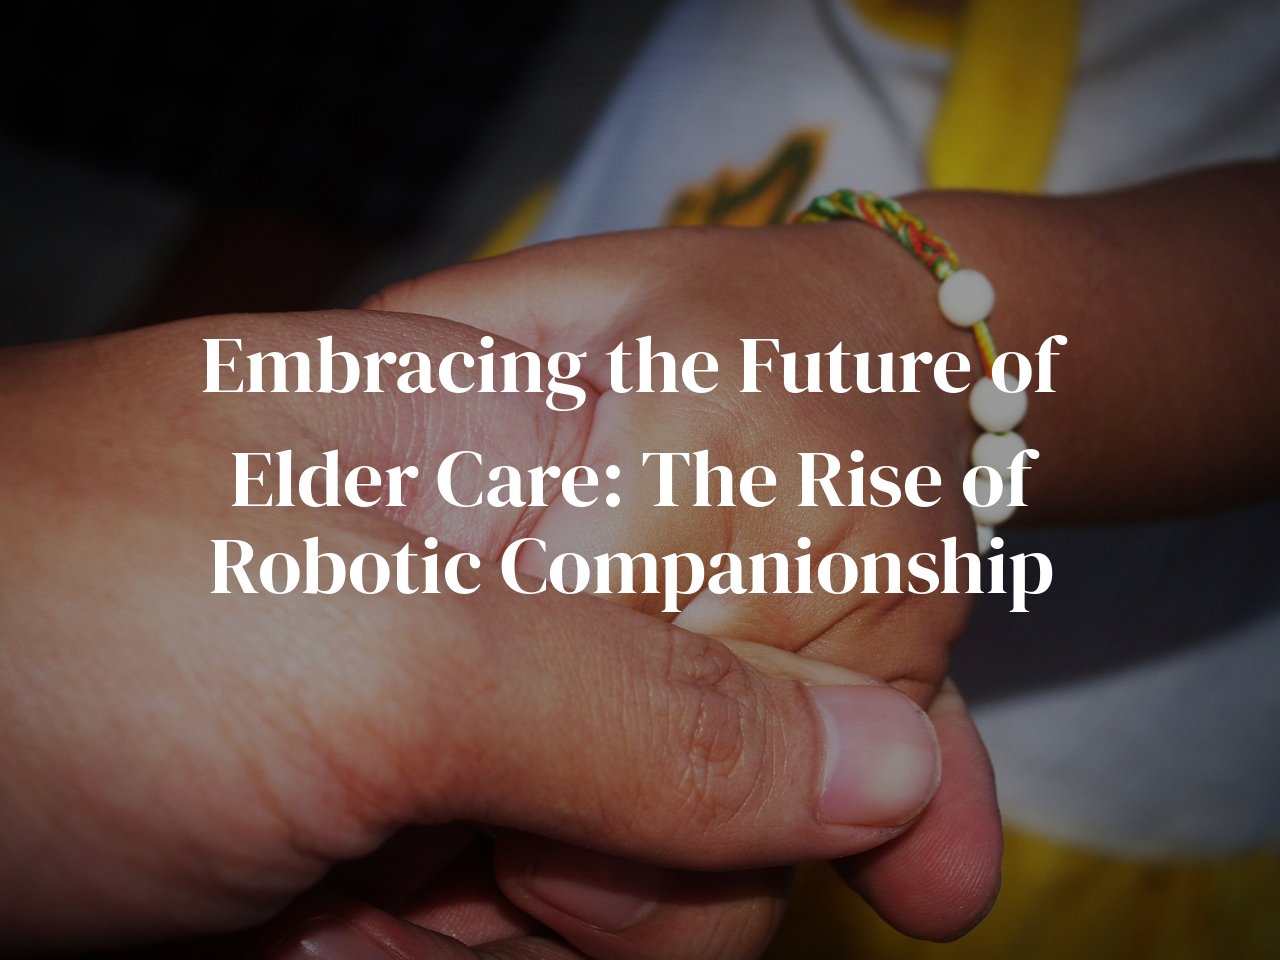 Embracing the Future of Elder Care: The Rise of Robotic Companionship